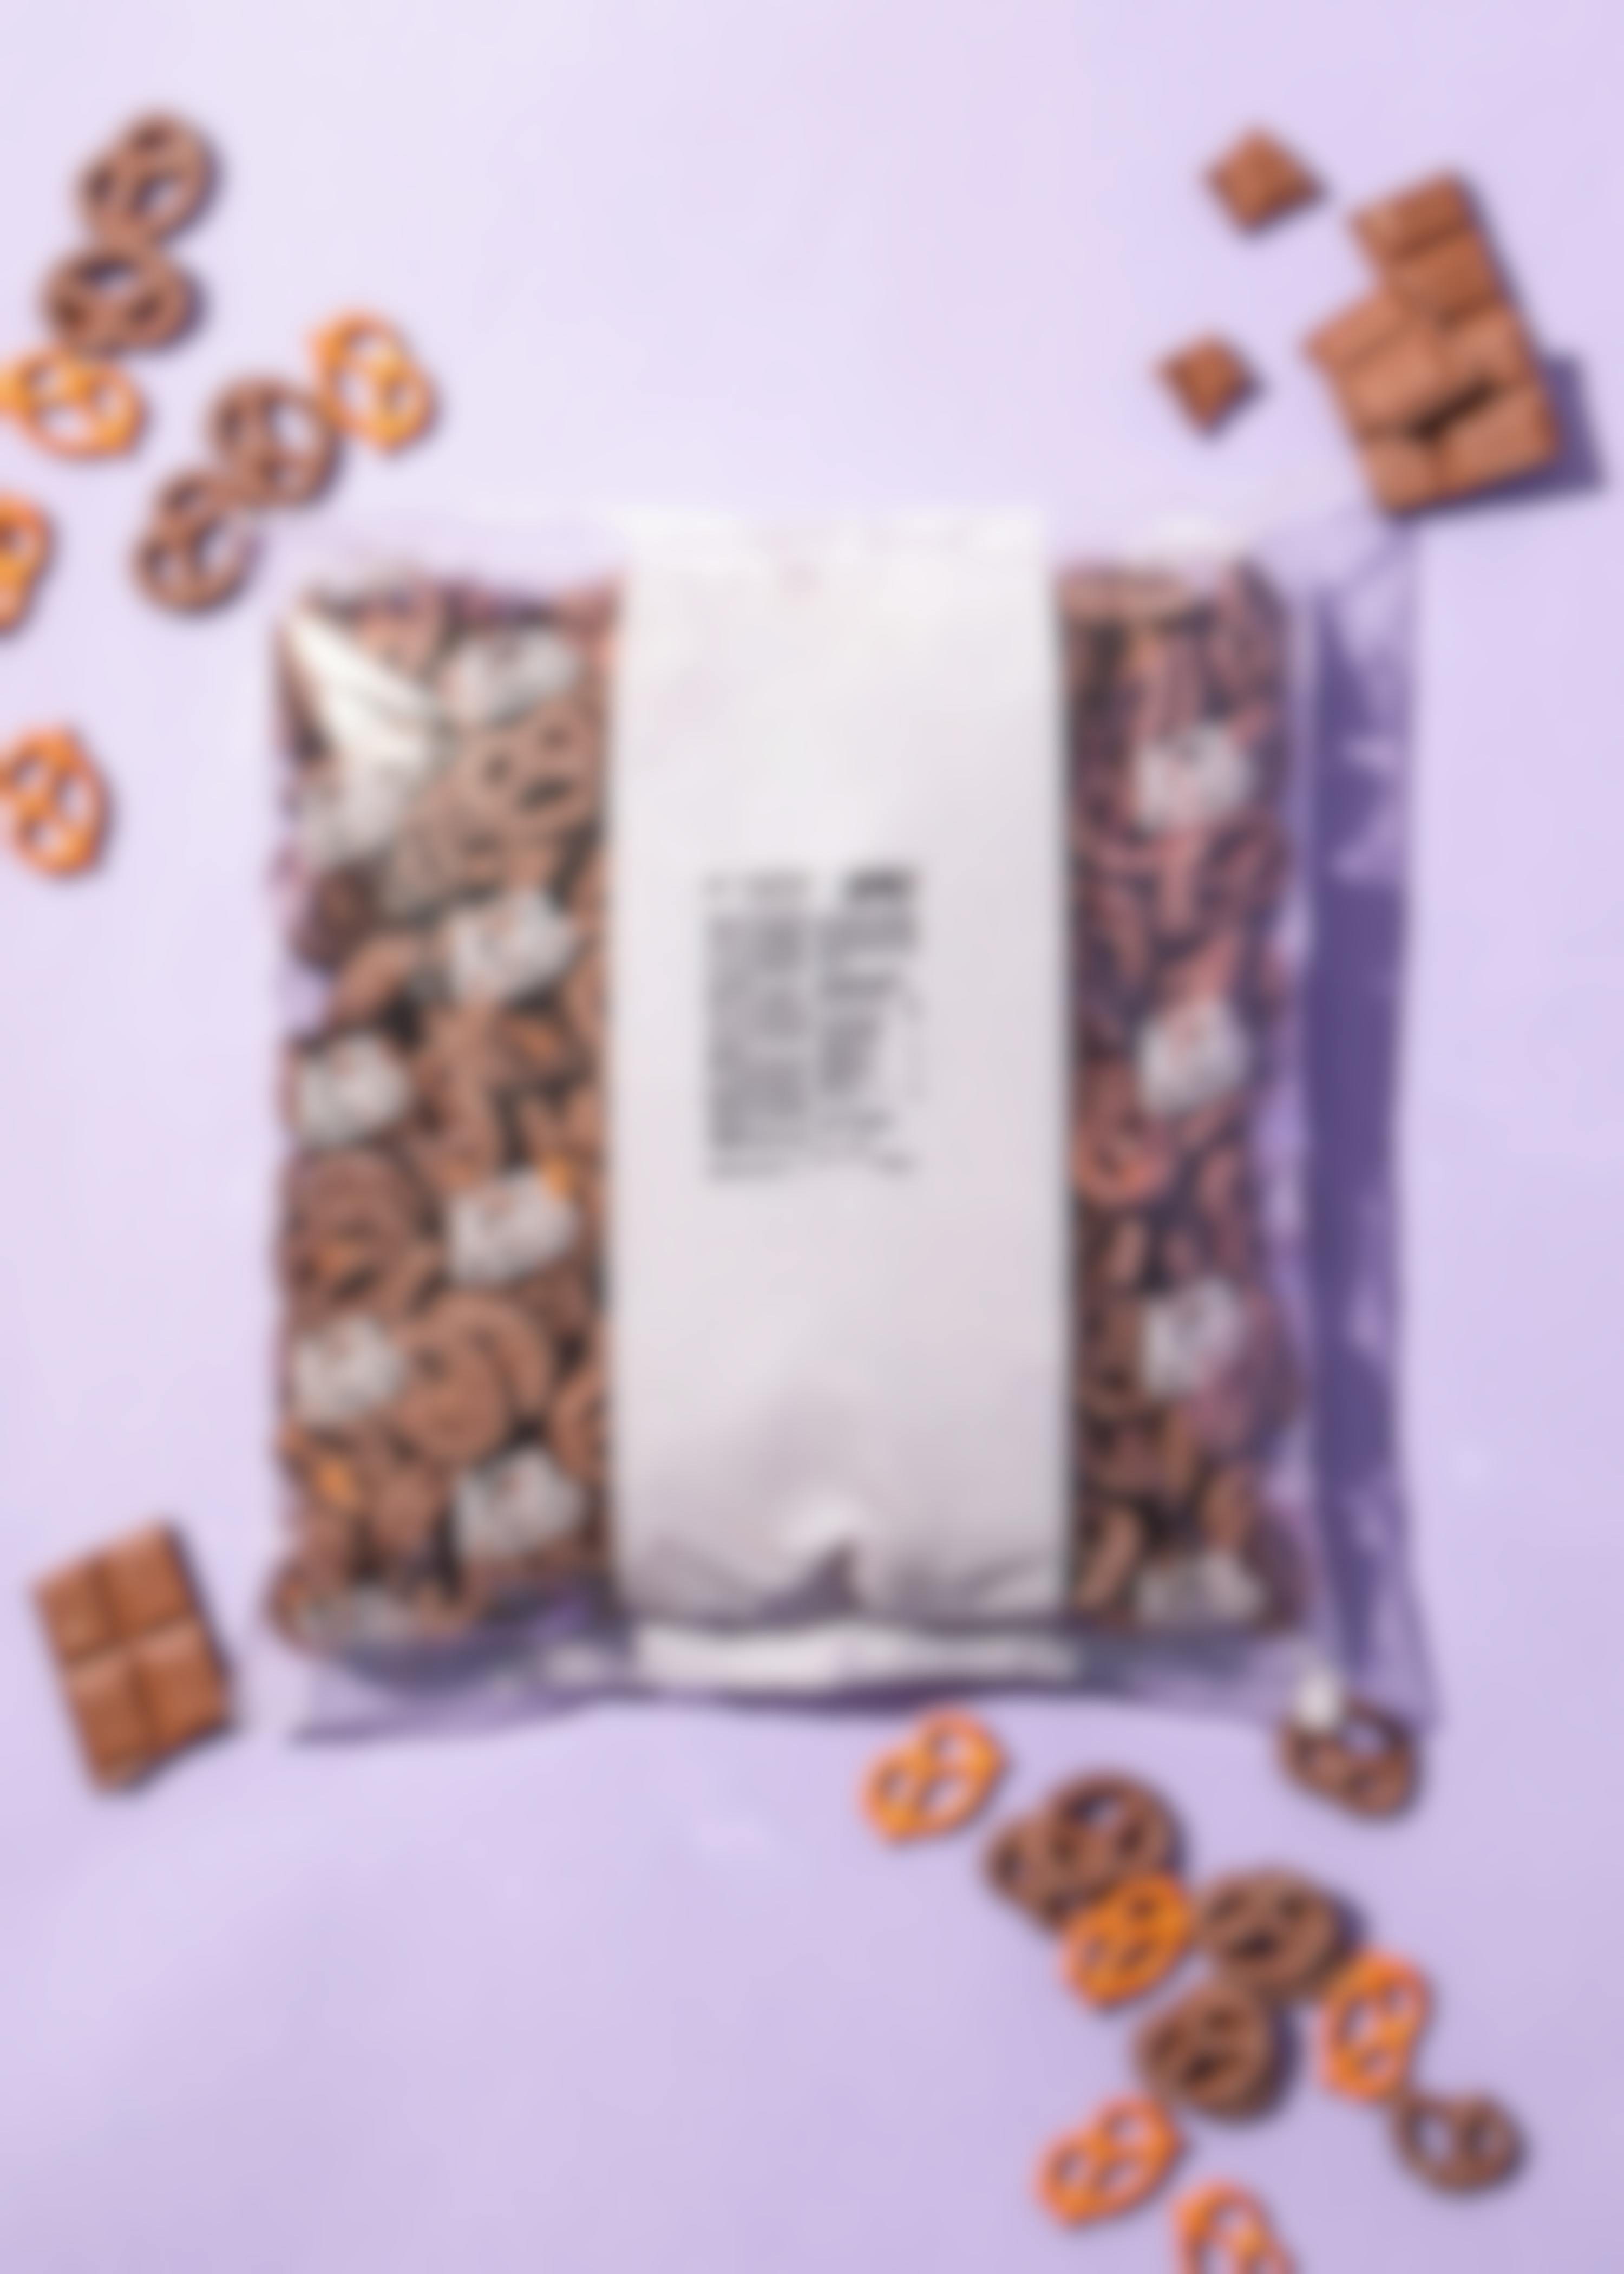 Pretzels covered in whole milk chocolate 1kg